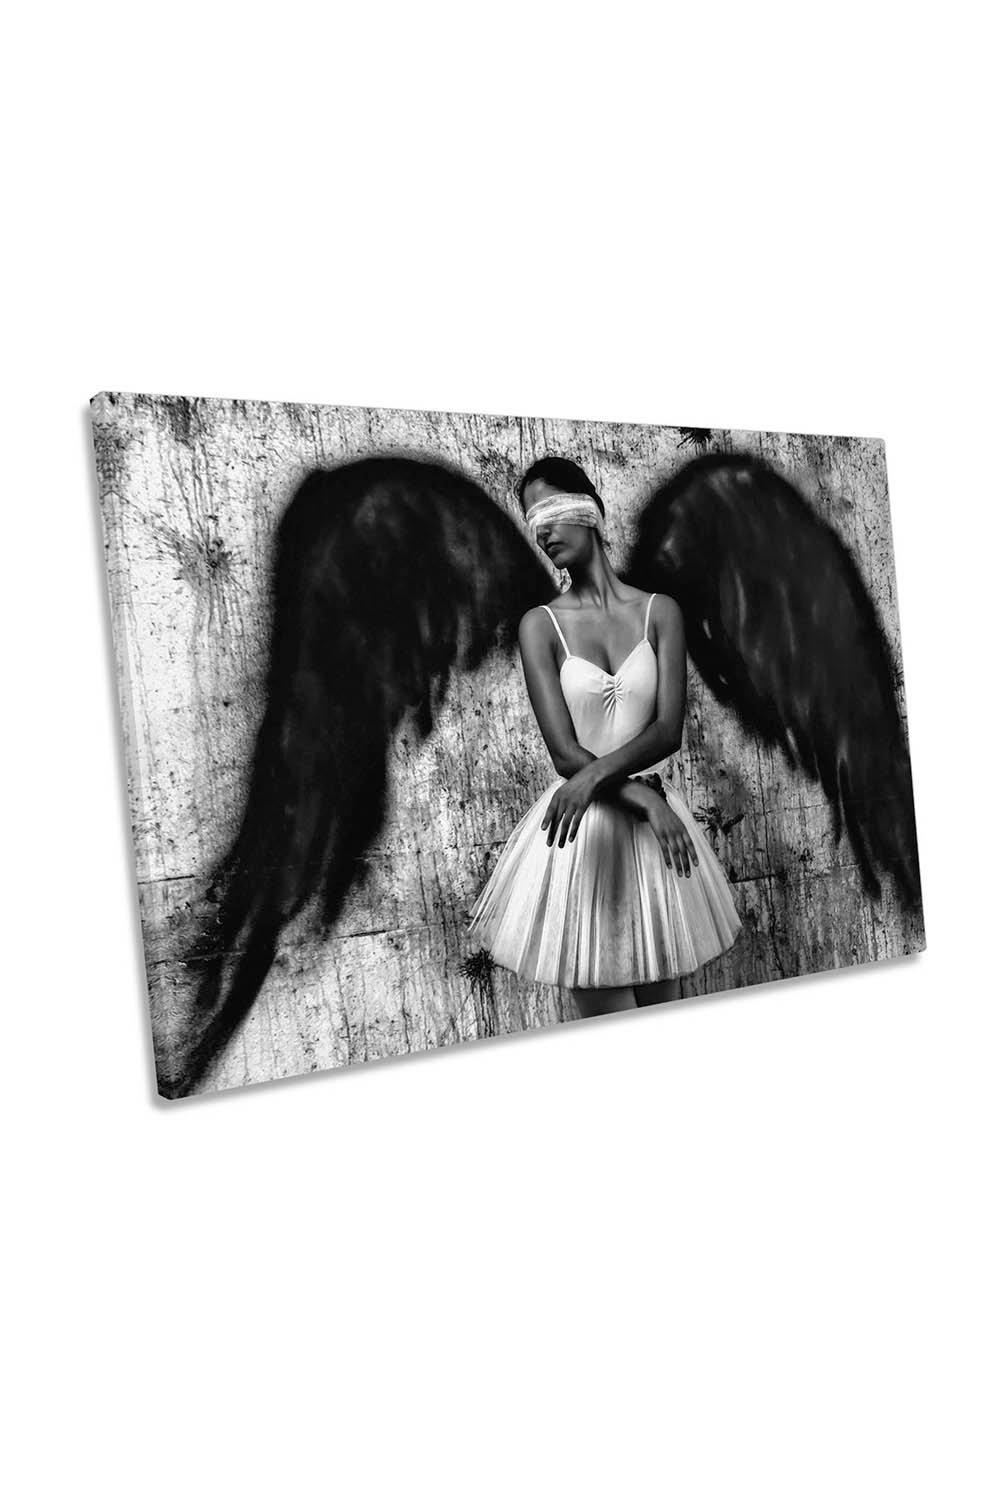 Angel Wings Blindfold Modern Canvas Wall Art Picture Print